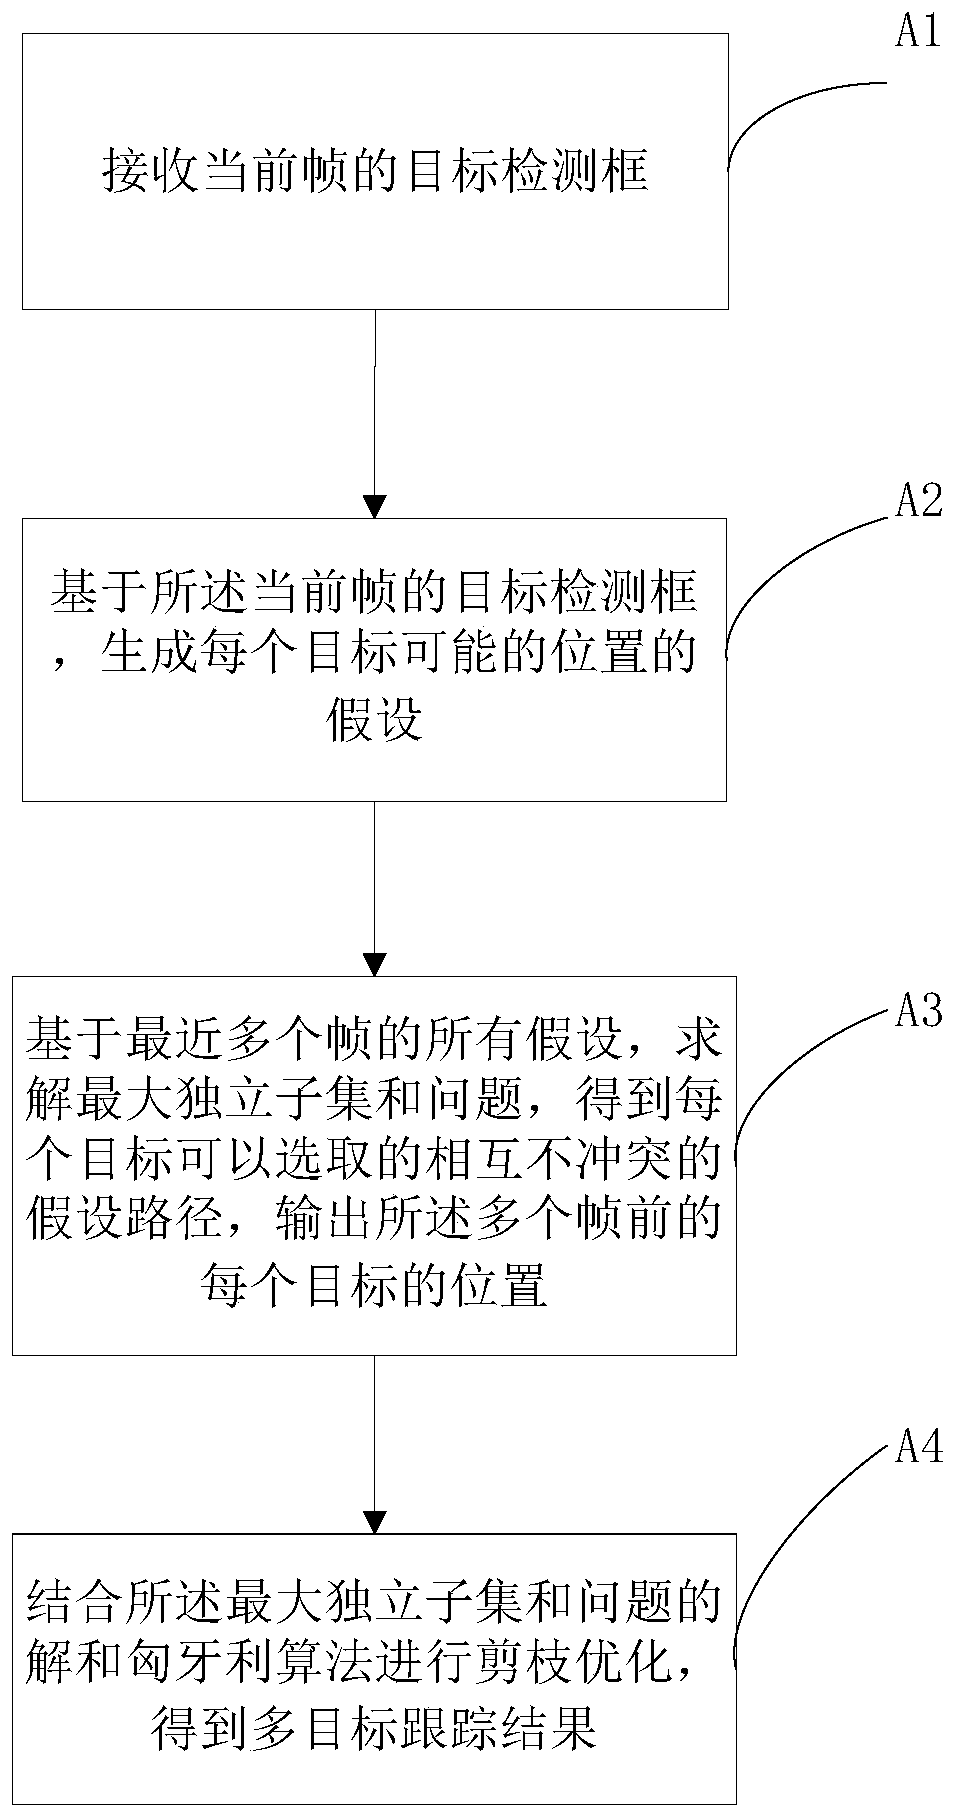 Monitoring scene multi-target tracking method and system